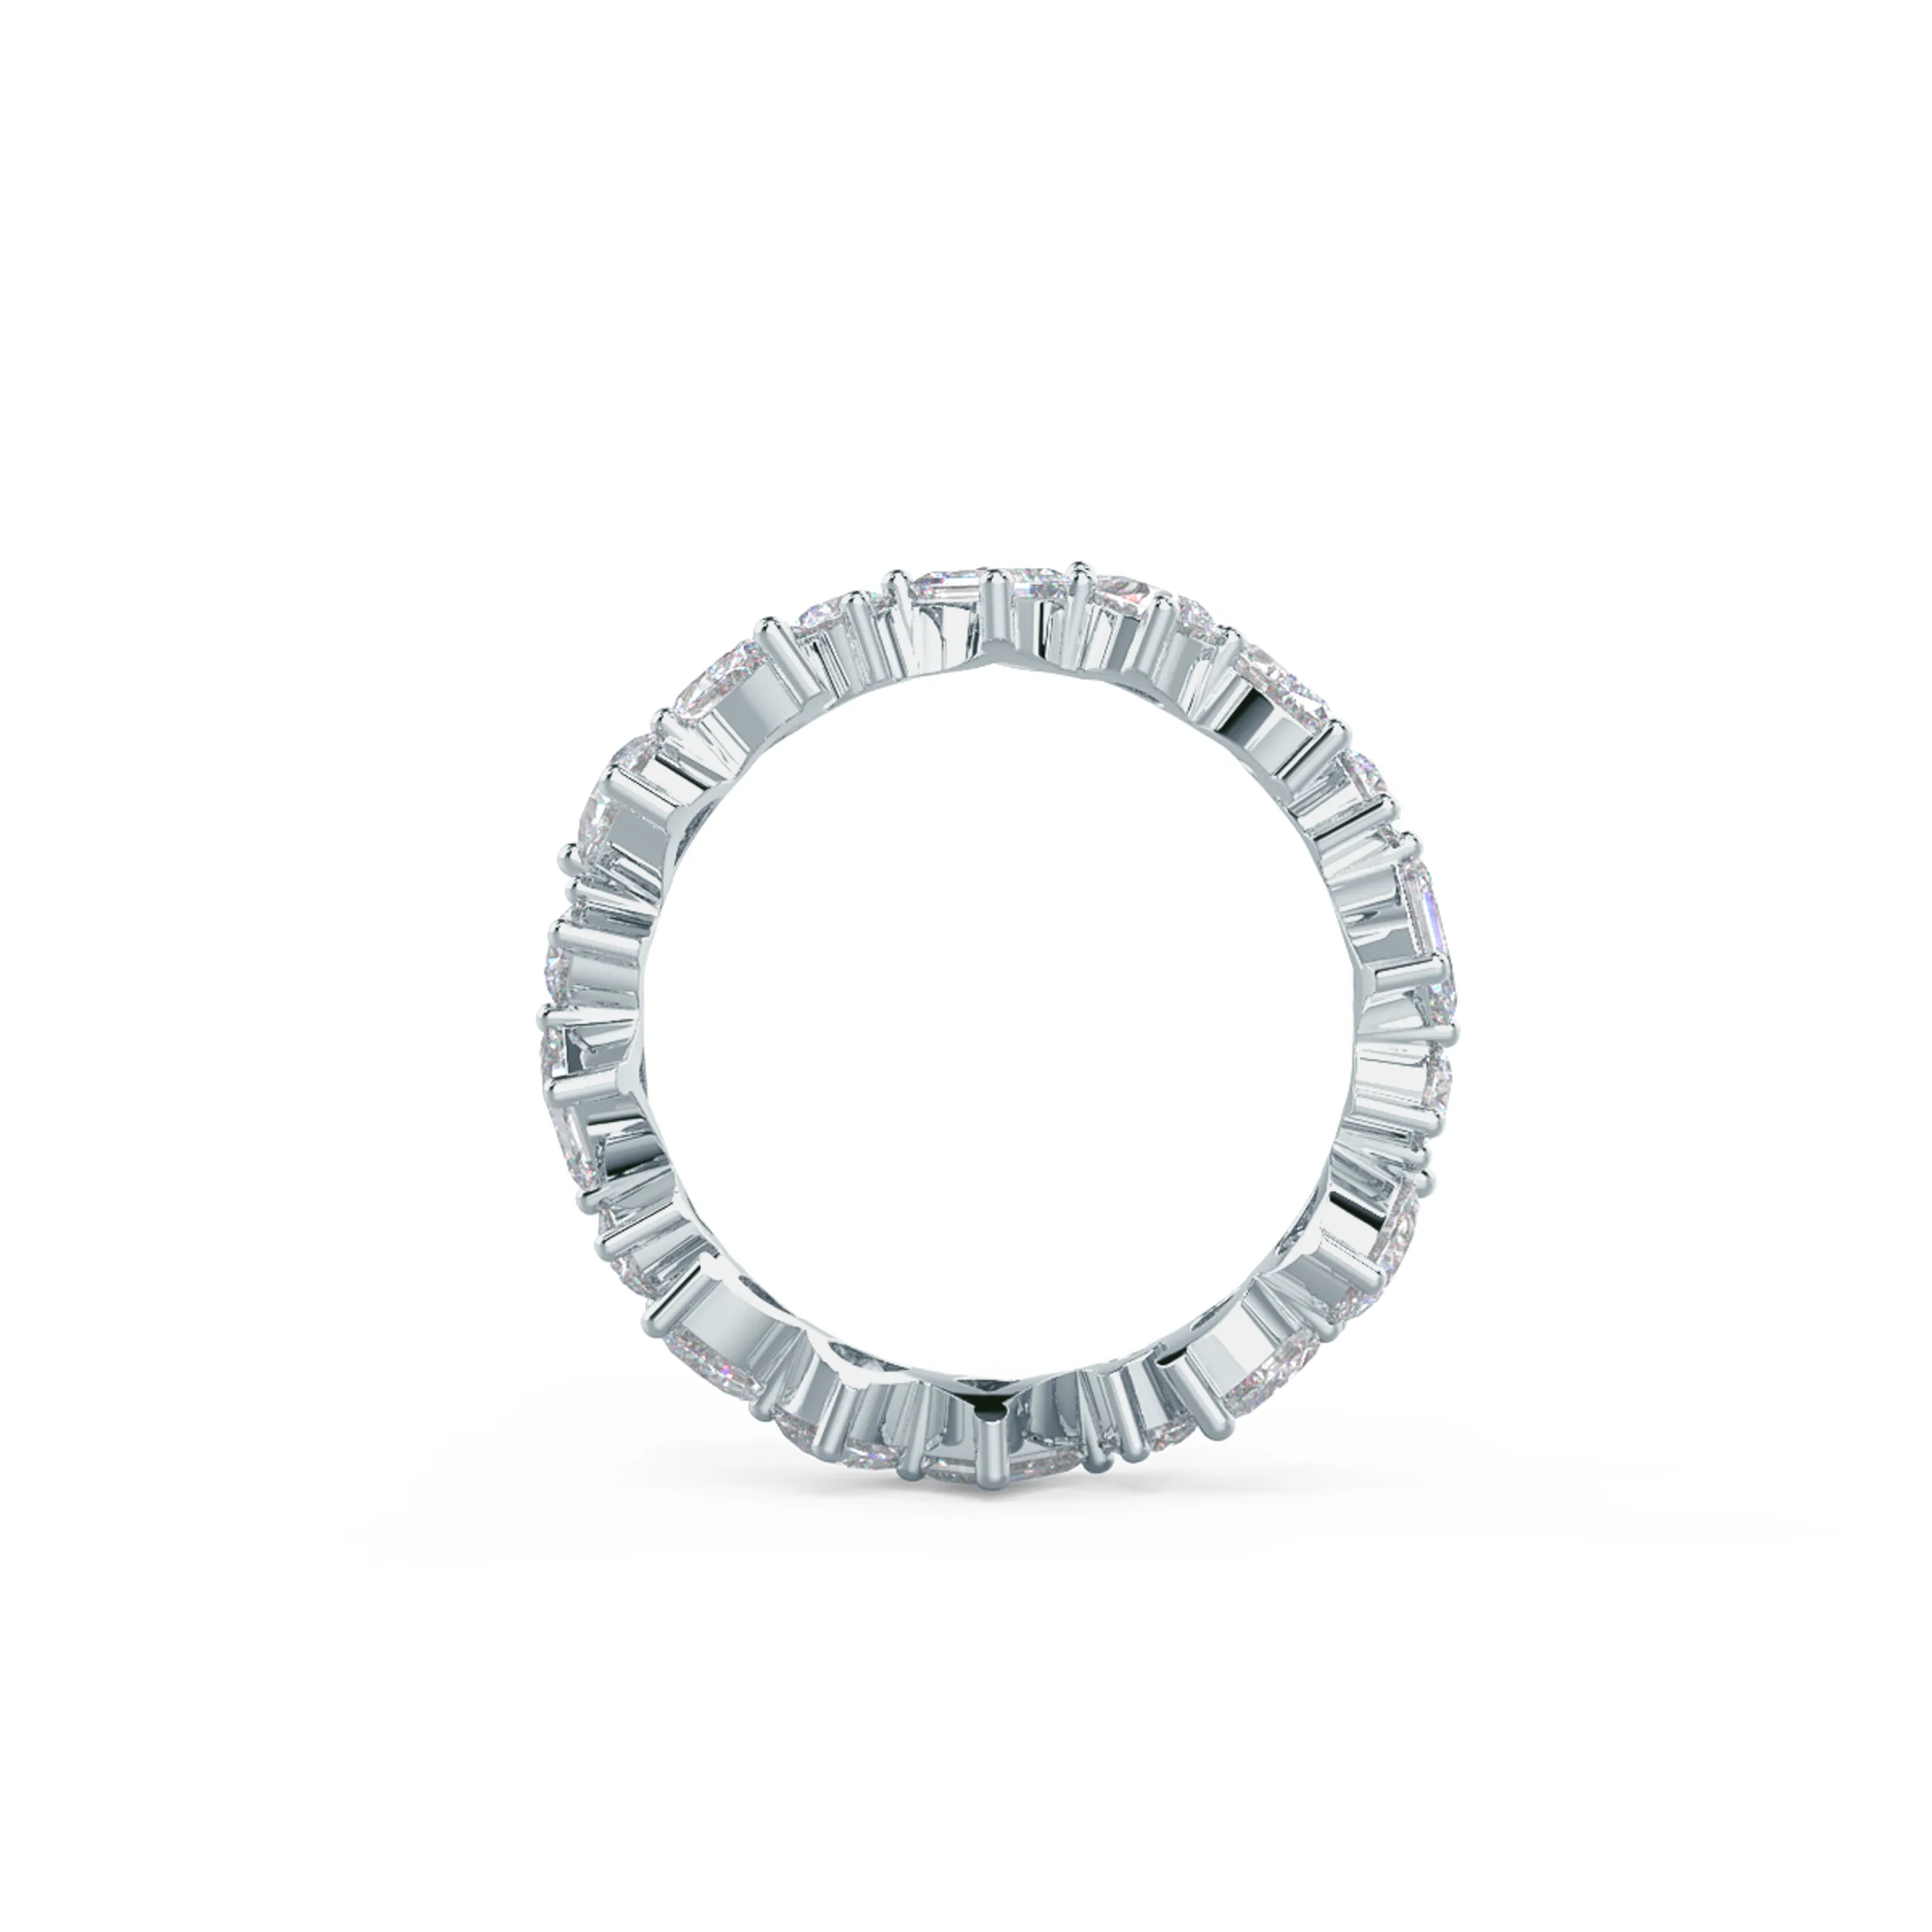 Exceptional Quality 2.5 ctw Diamonds Fiona Eternity Band in 18k White Gold (Profile View)